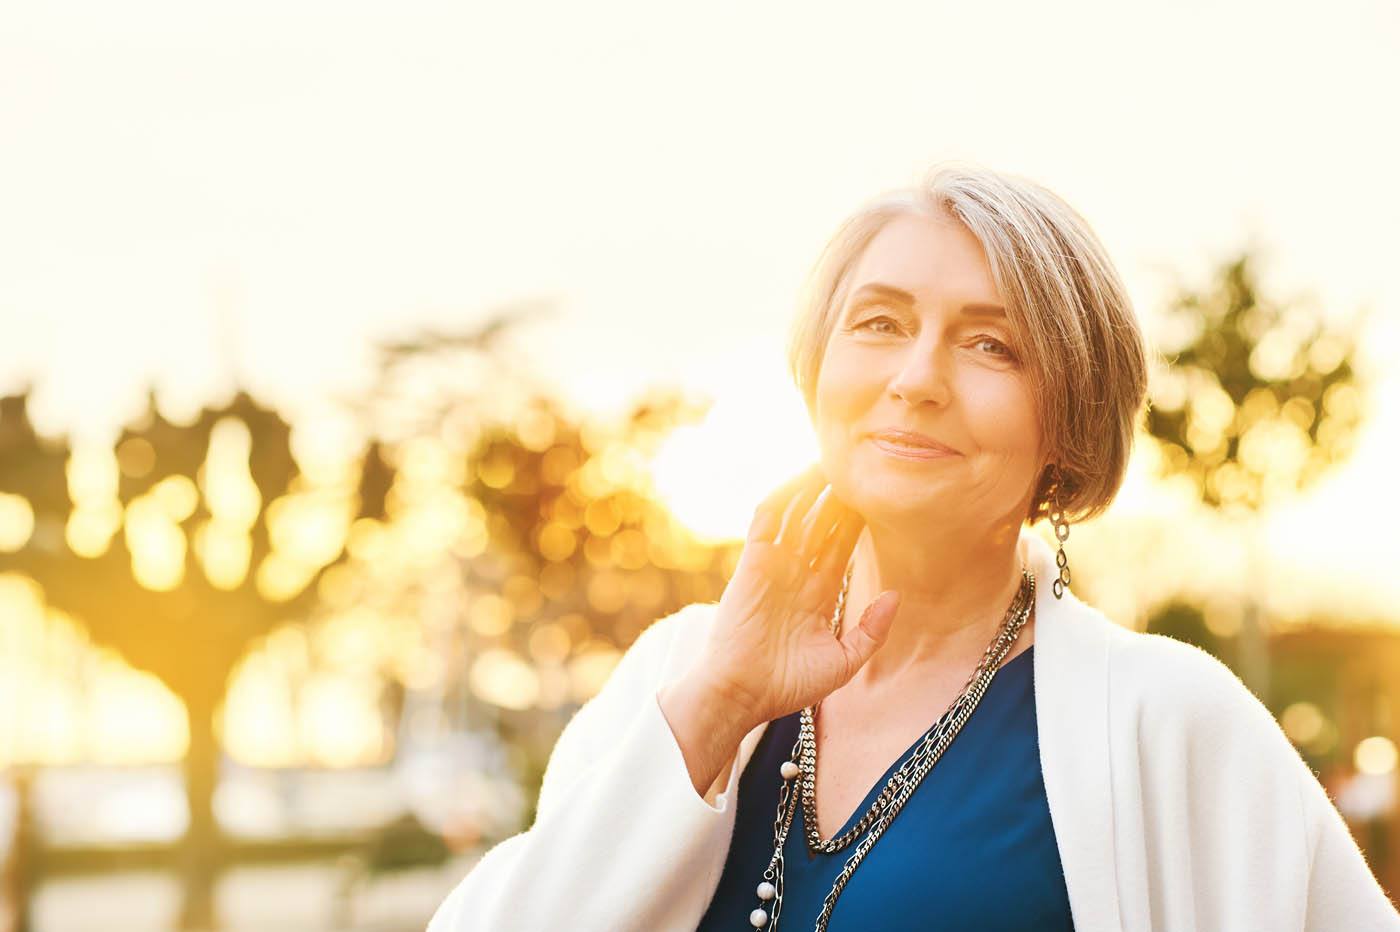 An women with radiating skin in her late 40s standing in front of a sunset, learn the benefits of our photofacial in your local area.